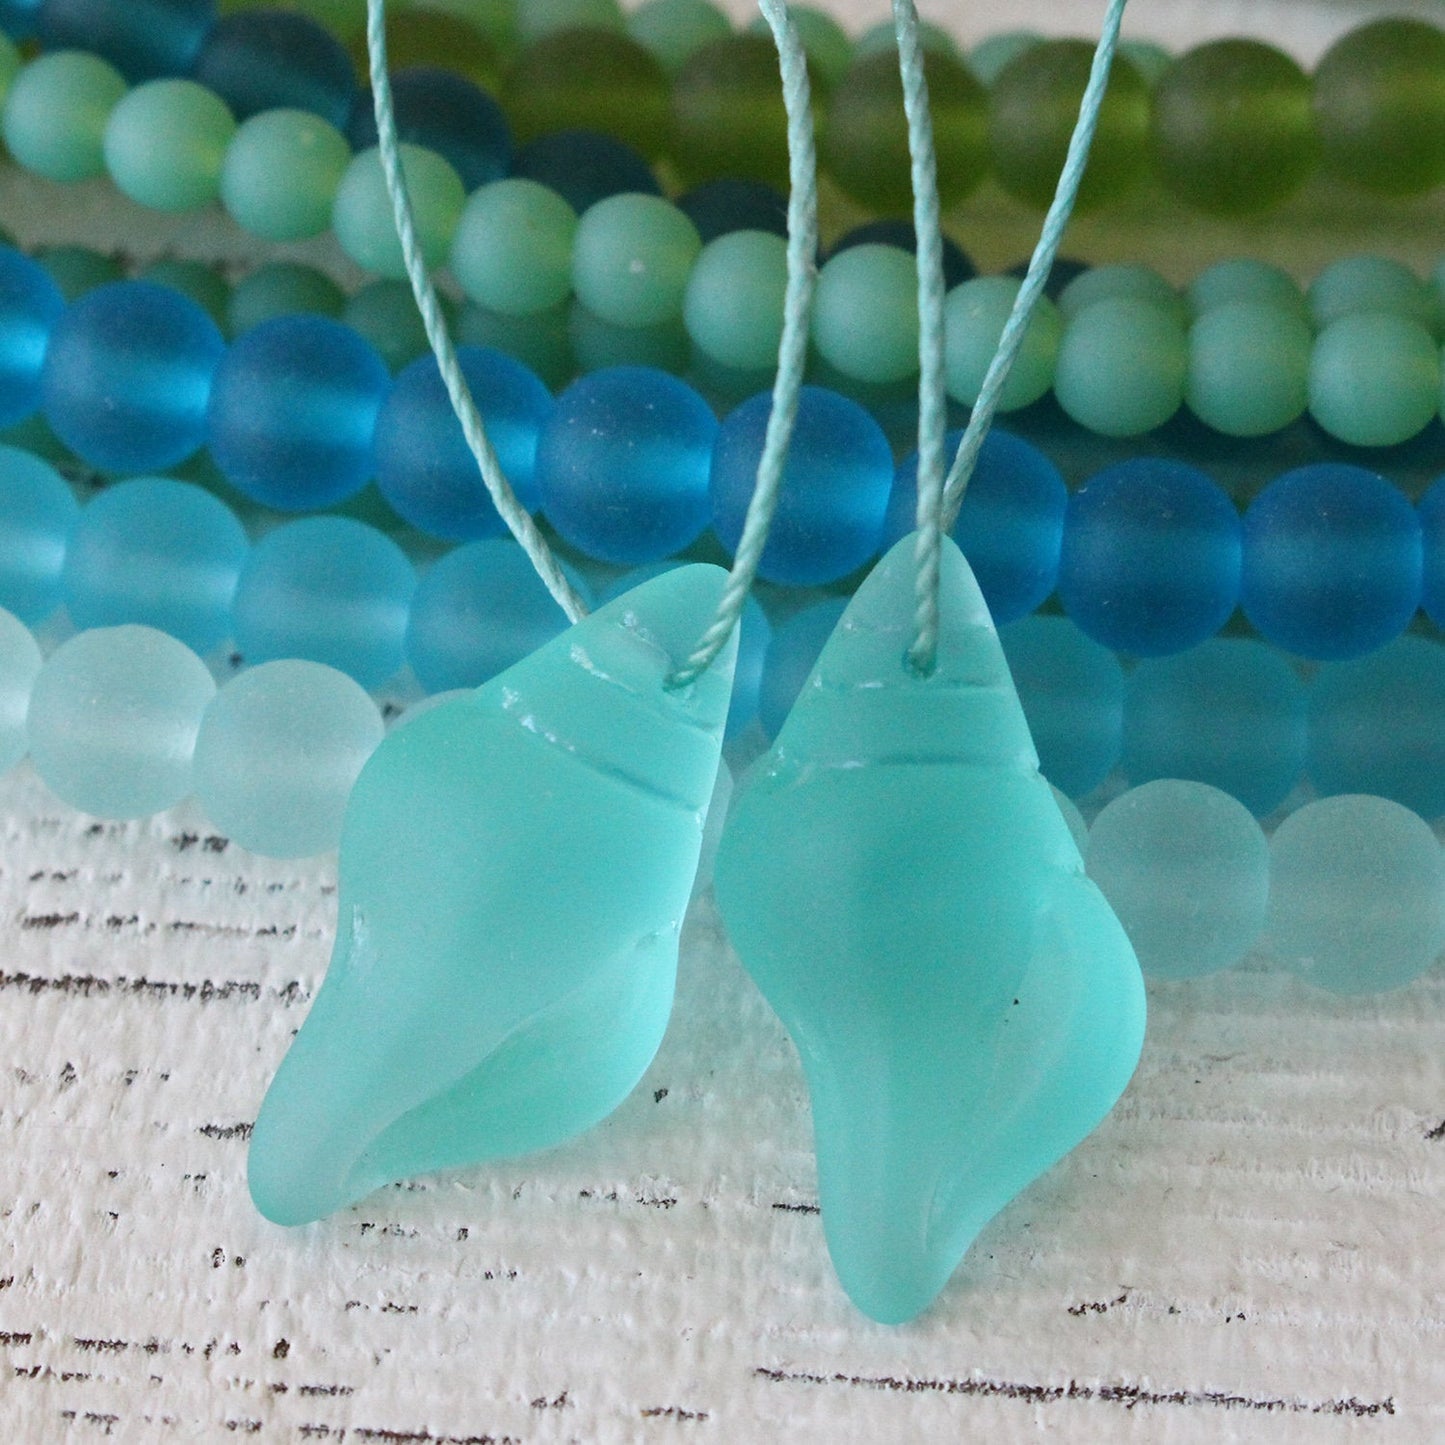 12x26mm Frosted Glass Conch Shell Beads - Seafoam - 2 Beads